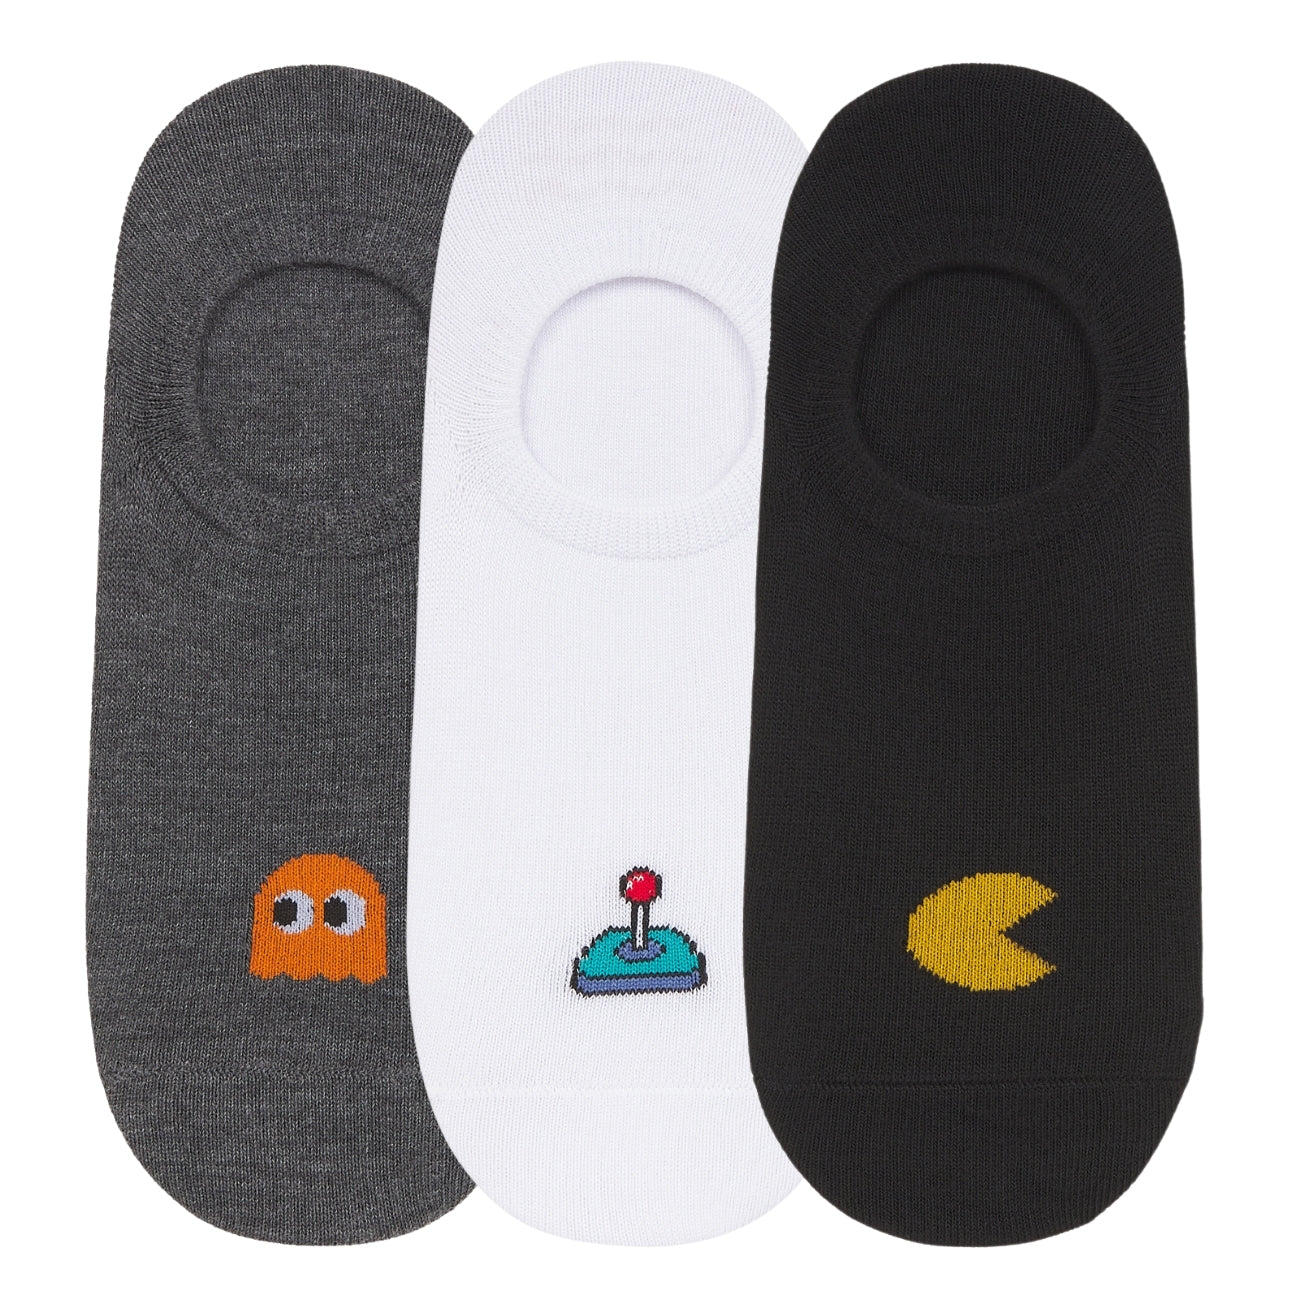 IDENTITY Apparel Retro Game Collection Plain Cotton Foot Socks with Print - IDENTITY Apparel Shop